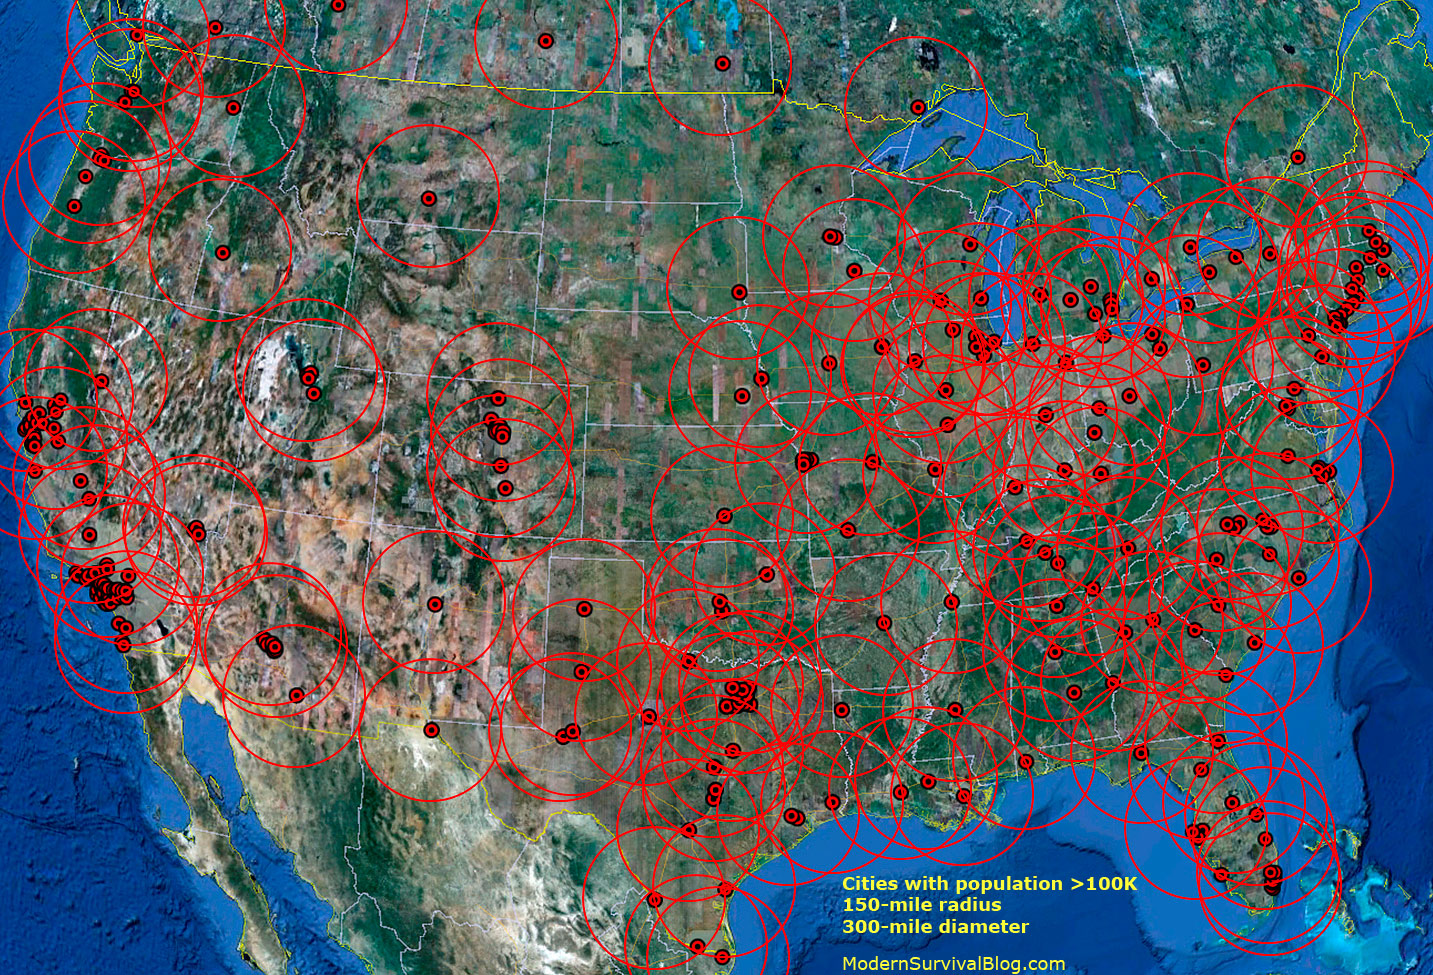 usa-survival-location-map-300-mile-zones-not-safe-with-population-more-than-100-thousand-1433x975.jpg